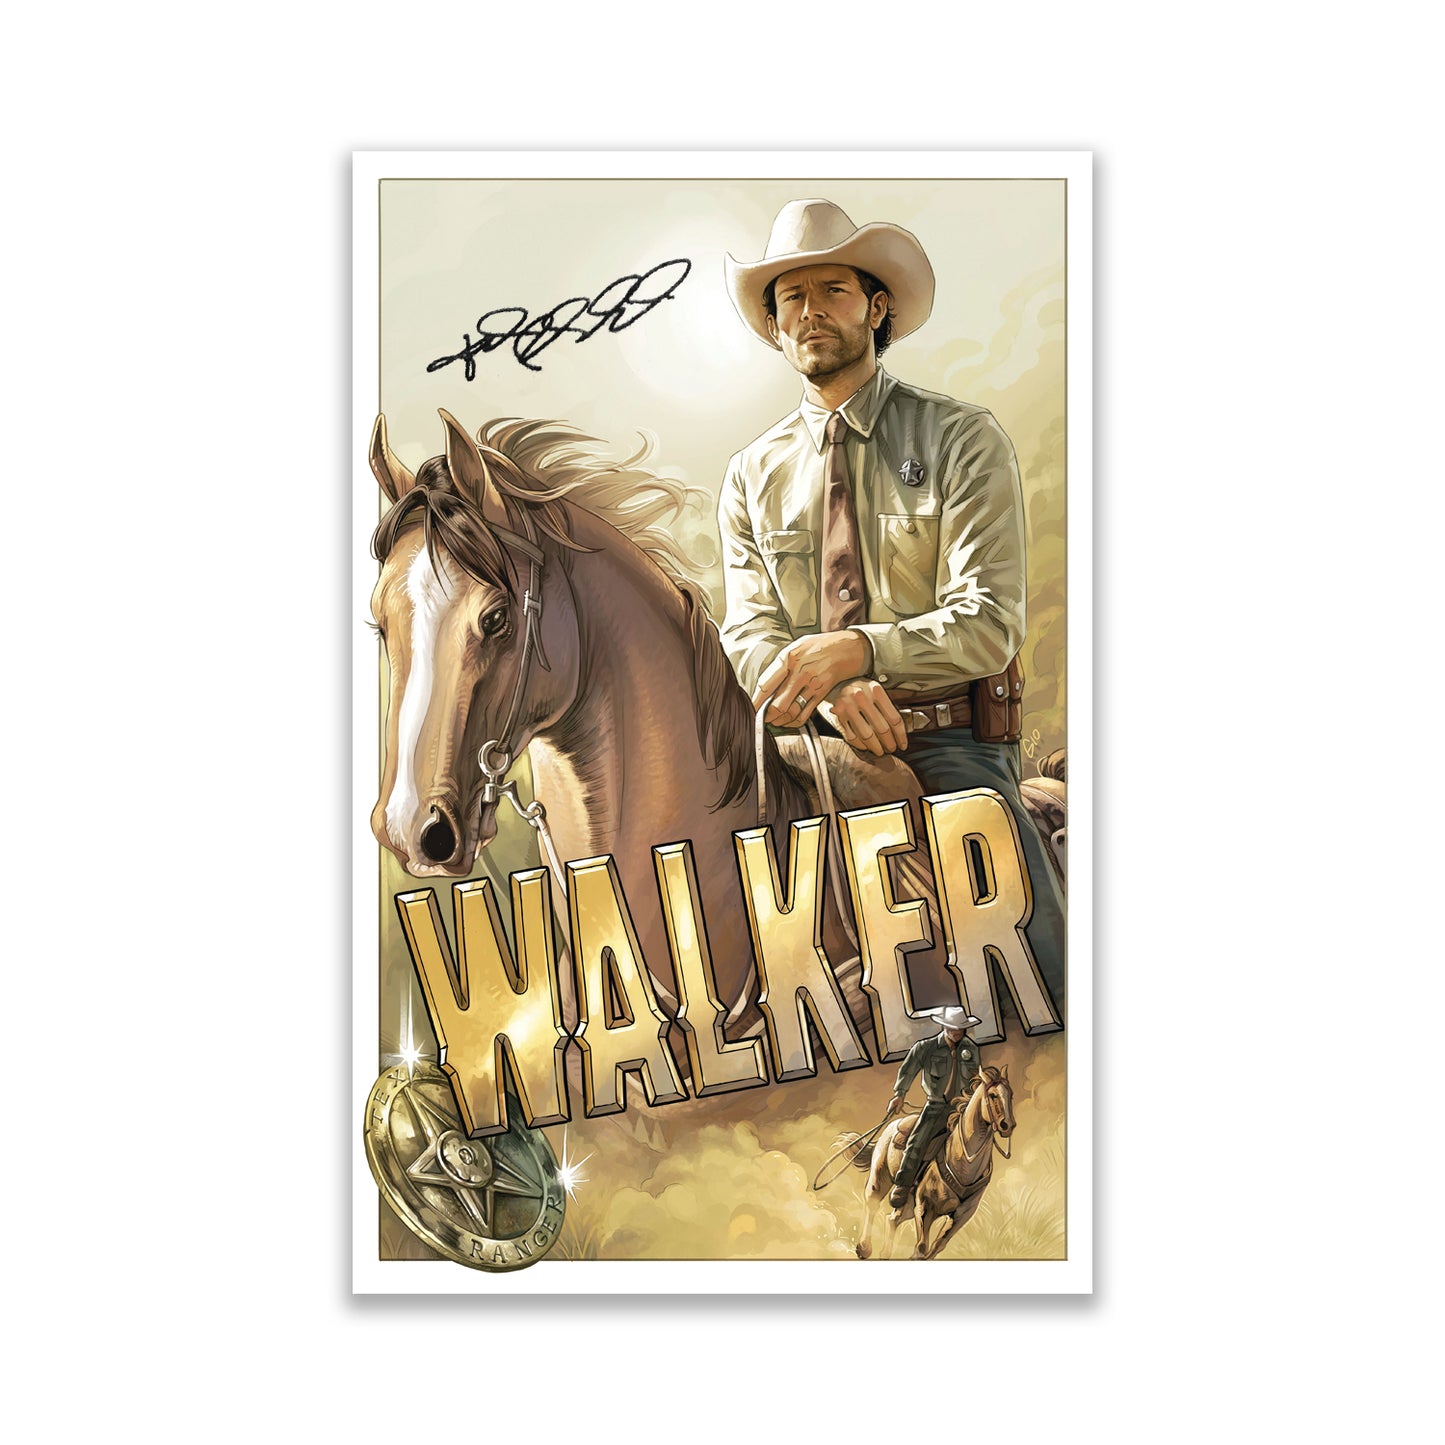 A drawing of the character Walker, portrayed by actor Jared Padalecki, on horseback. Under the horse is gold text saying "walker," with a sheriff's badge next to it. At the top is Jared Padalecki's autograph.